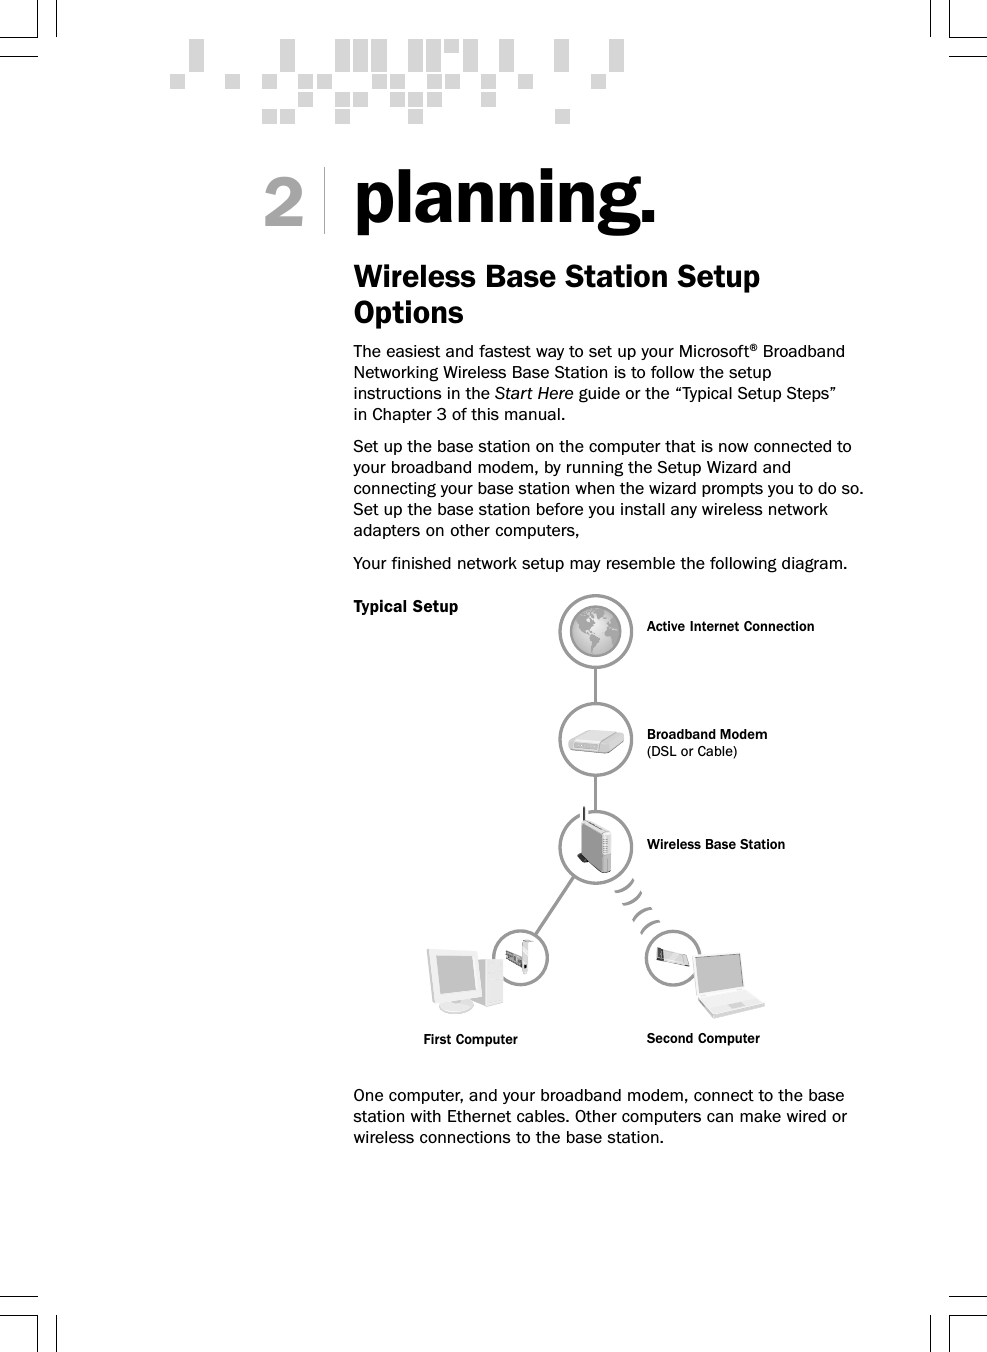 planning.Wireless Base Station SetupOptionsThe easiest and fastest way to set up your Microsoft® BroadbandNetworking Wireless Base Station is to follow the setupinstructions in the Start Here guide or the “Typical Setup Steps”in Chapter 3 of this manual.Set up the base station on the computer that is now connected toyour broadband modem, by running the Setup Wizard andconnecting your base station when the wizard prompts you to do so.Set up the base station before you install any wireless networkadapters on other computers,Your finished network setup may resemble the following diagram.One computer, and your broadband modem, connect to the basestation with Ethernet cables. Other computers can make wired orwireless connections to the base station.2Active Internet ConnectionBroadband Modem(DSL or Cable)Second ComputerFirst ComputerWireless Base StationTypical Setup